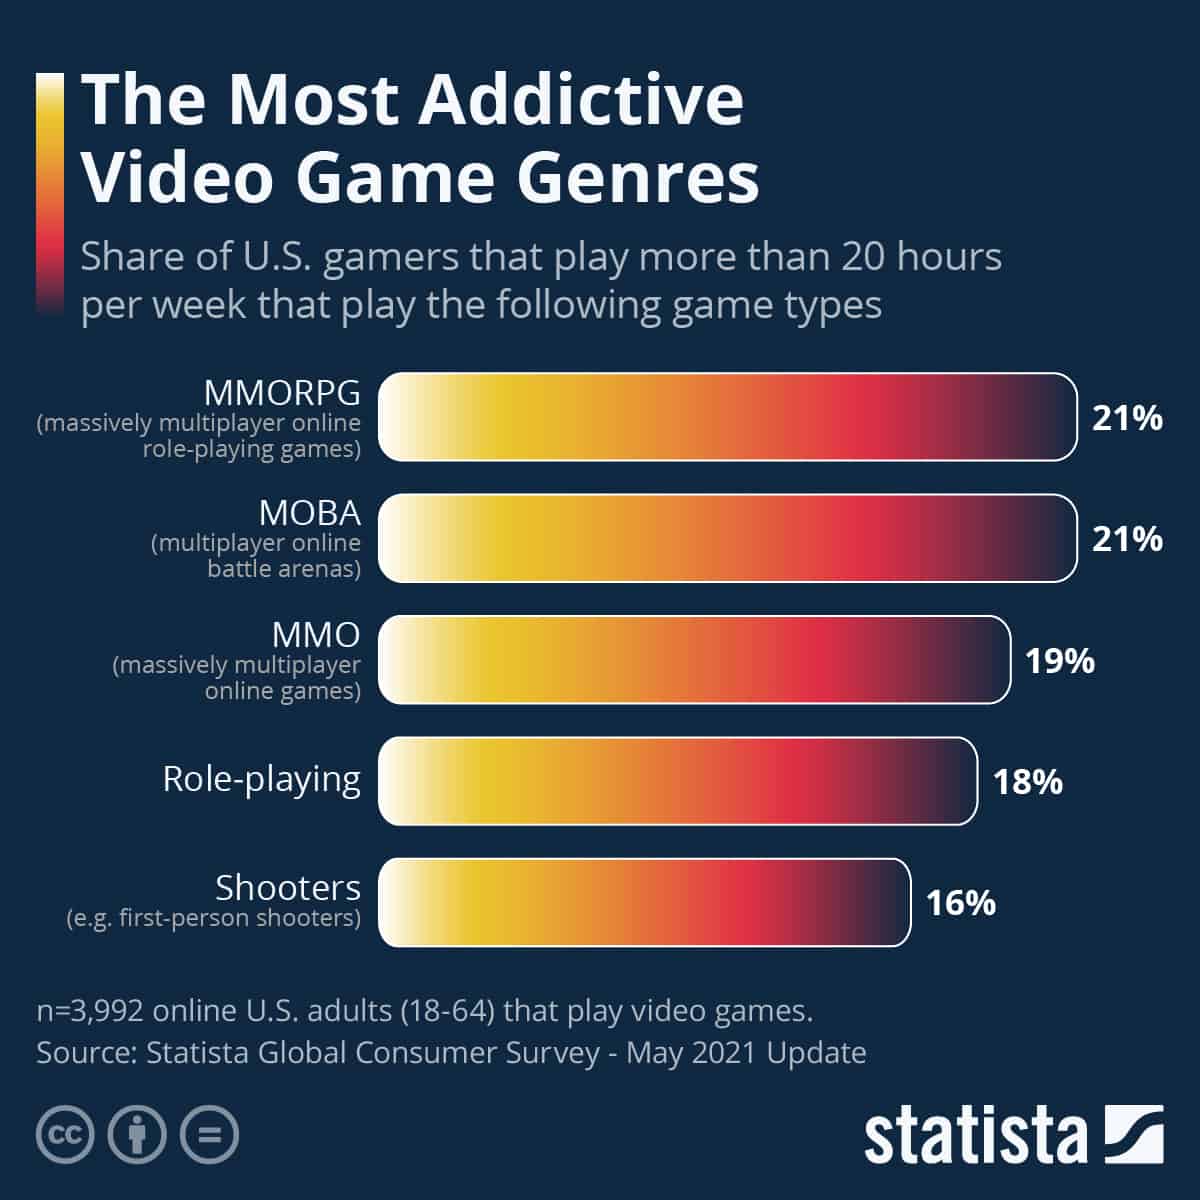 Chart ranking video game genres by addiction